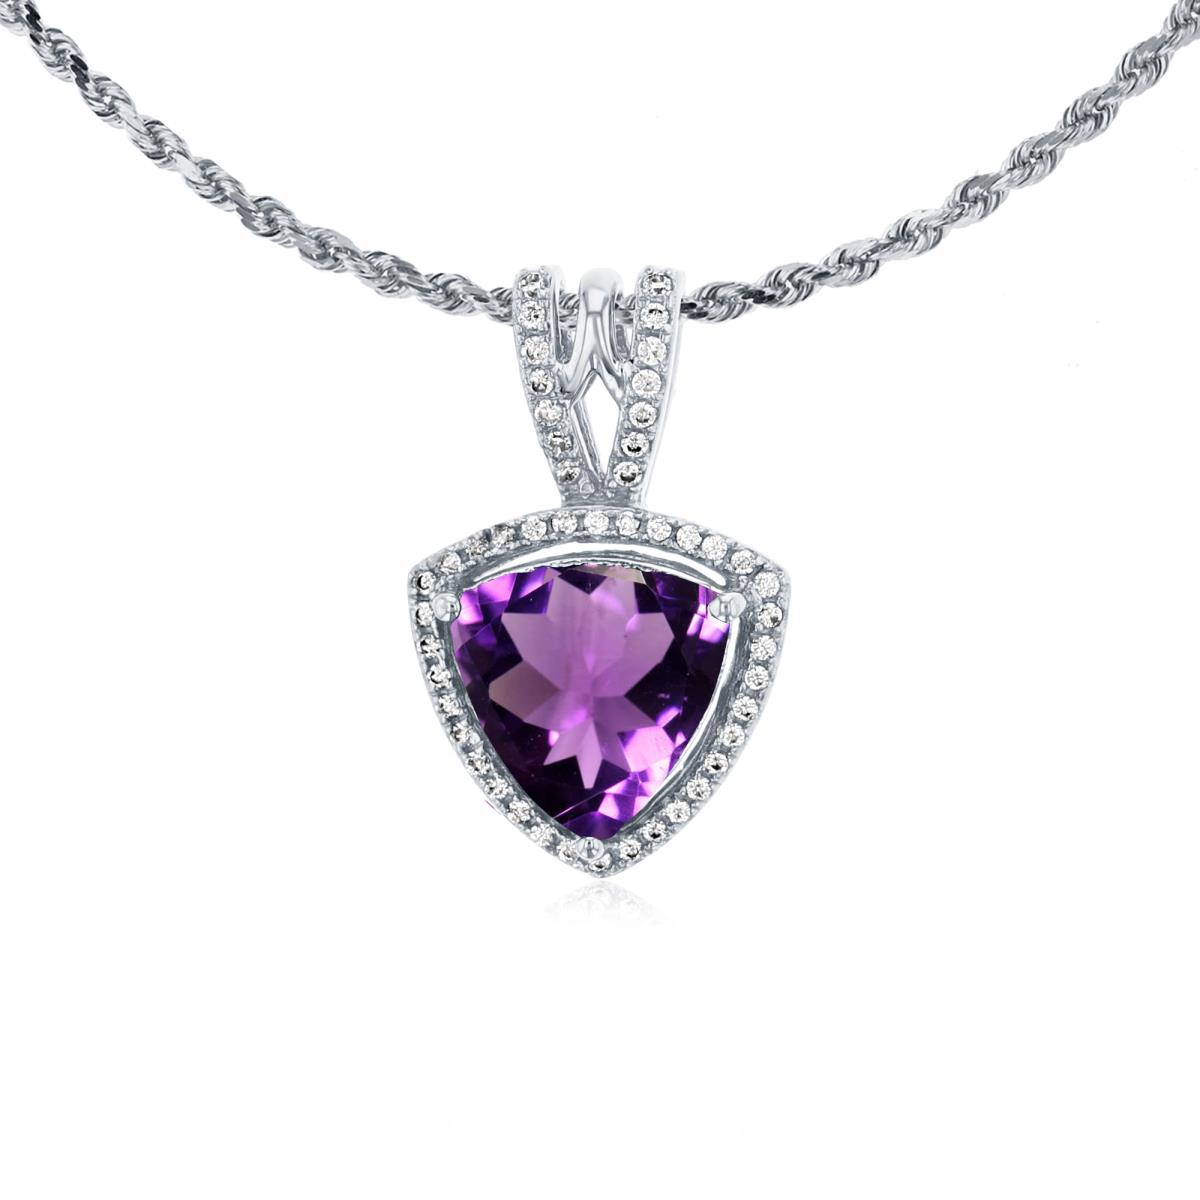 10K White Gold 8mm Trillion Amethyst & 0.13 CTTW Diamonds Frame 18" Rope Chain Necklace